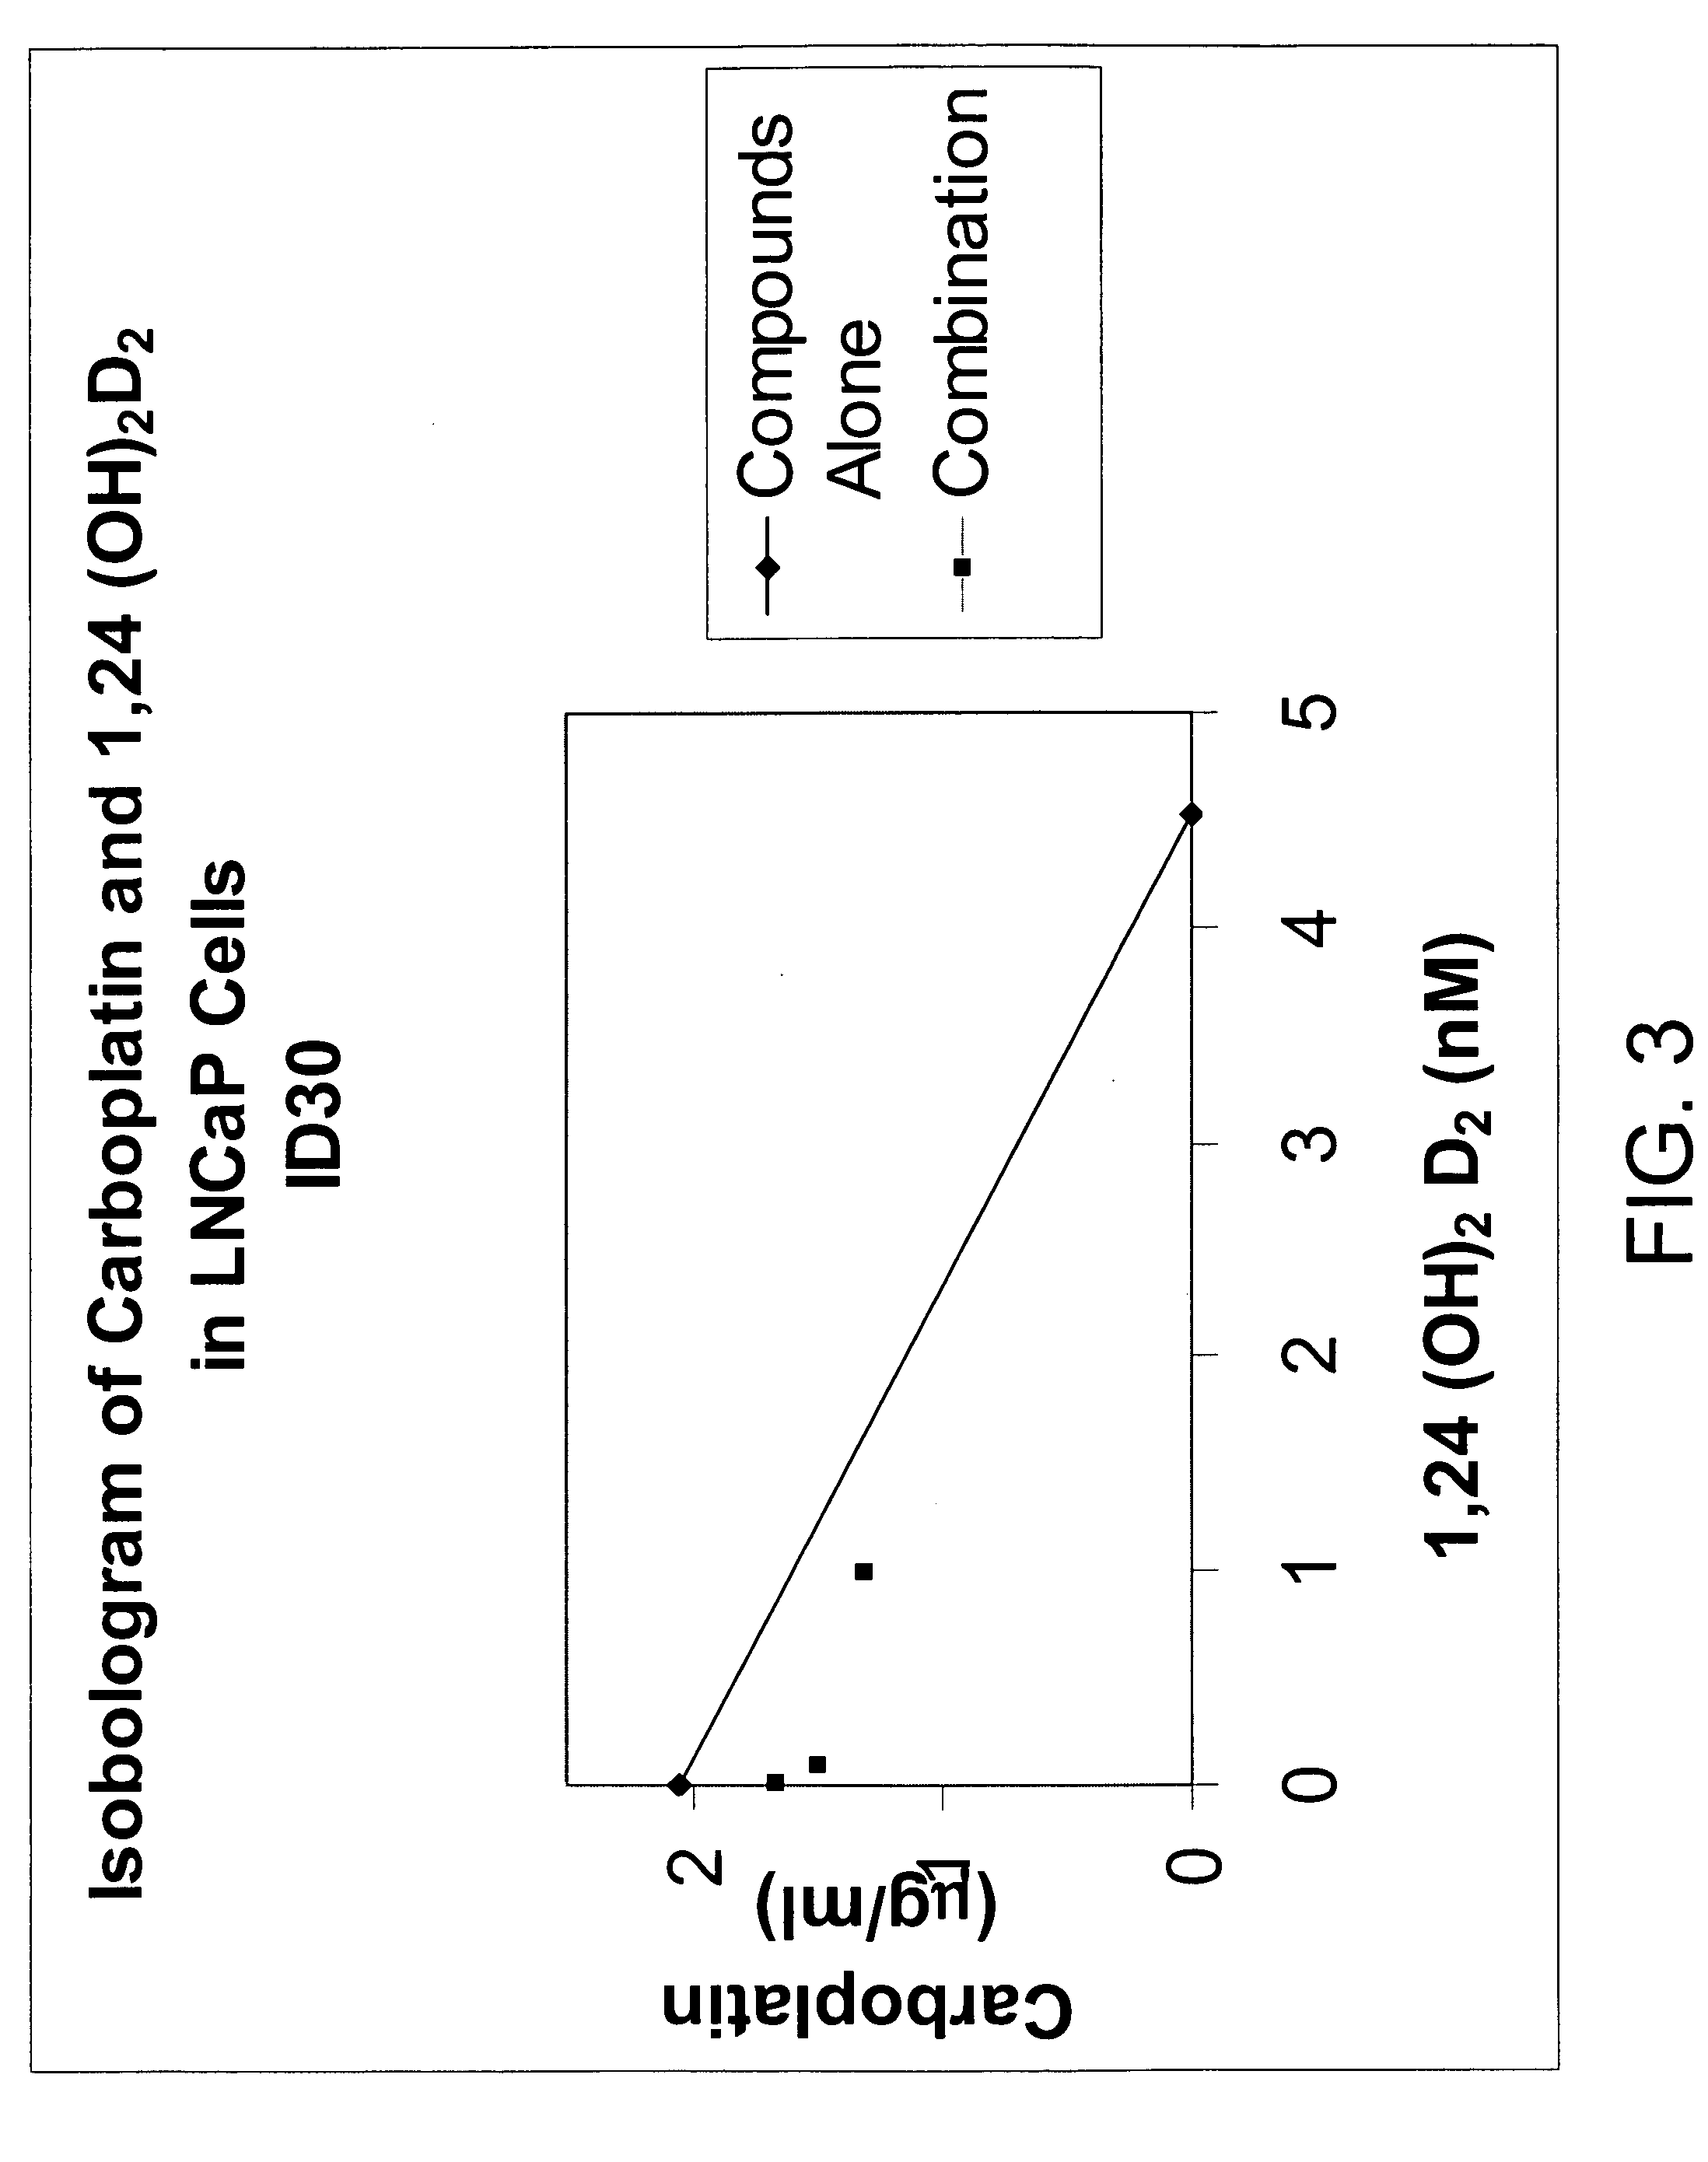 Method of treating prostatic diseases using a combination of vitamin D analogues and other agents